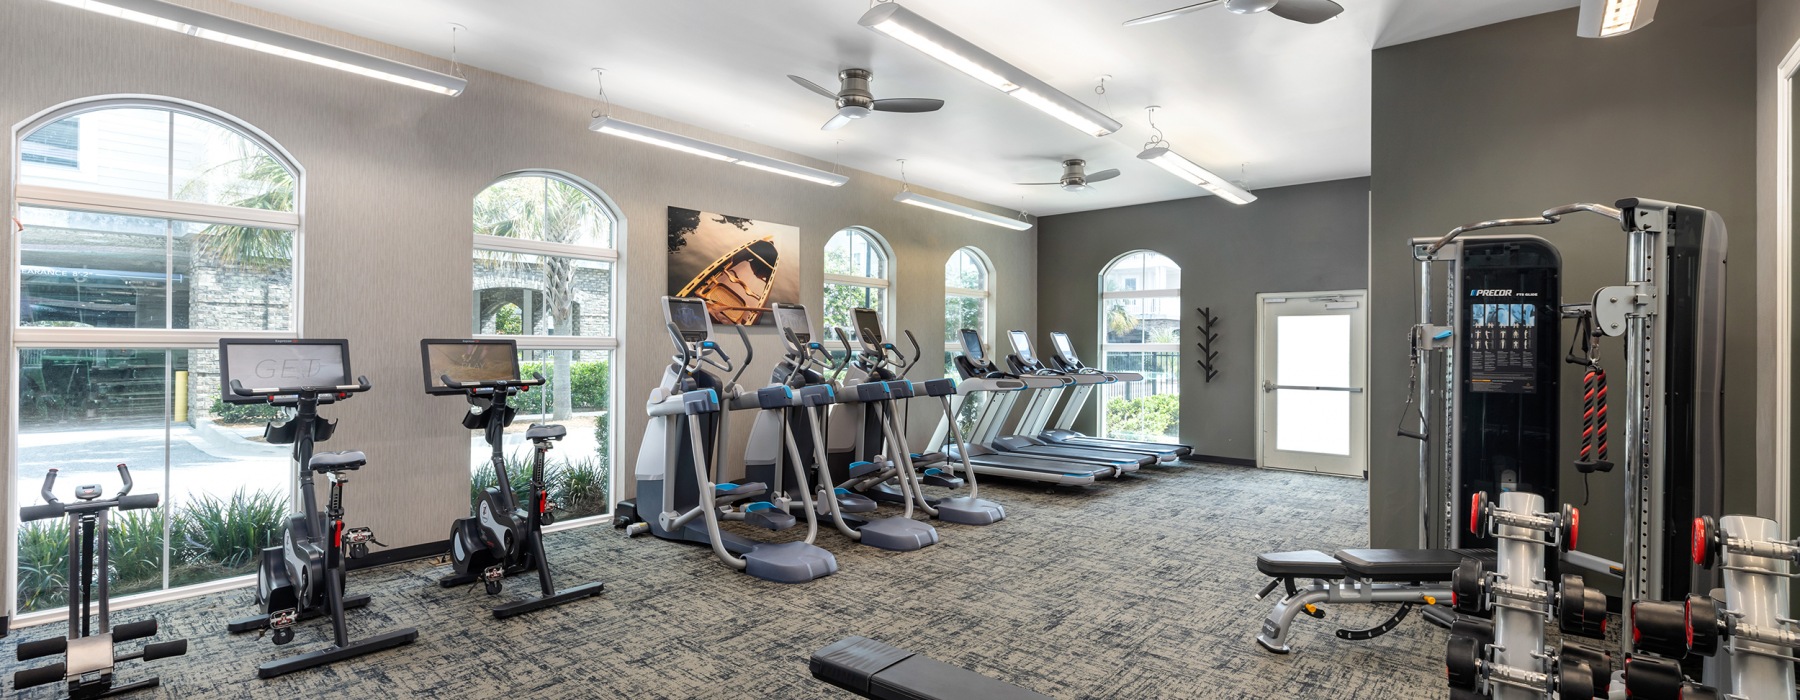 Fitness Center with natural lighting 